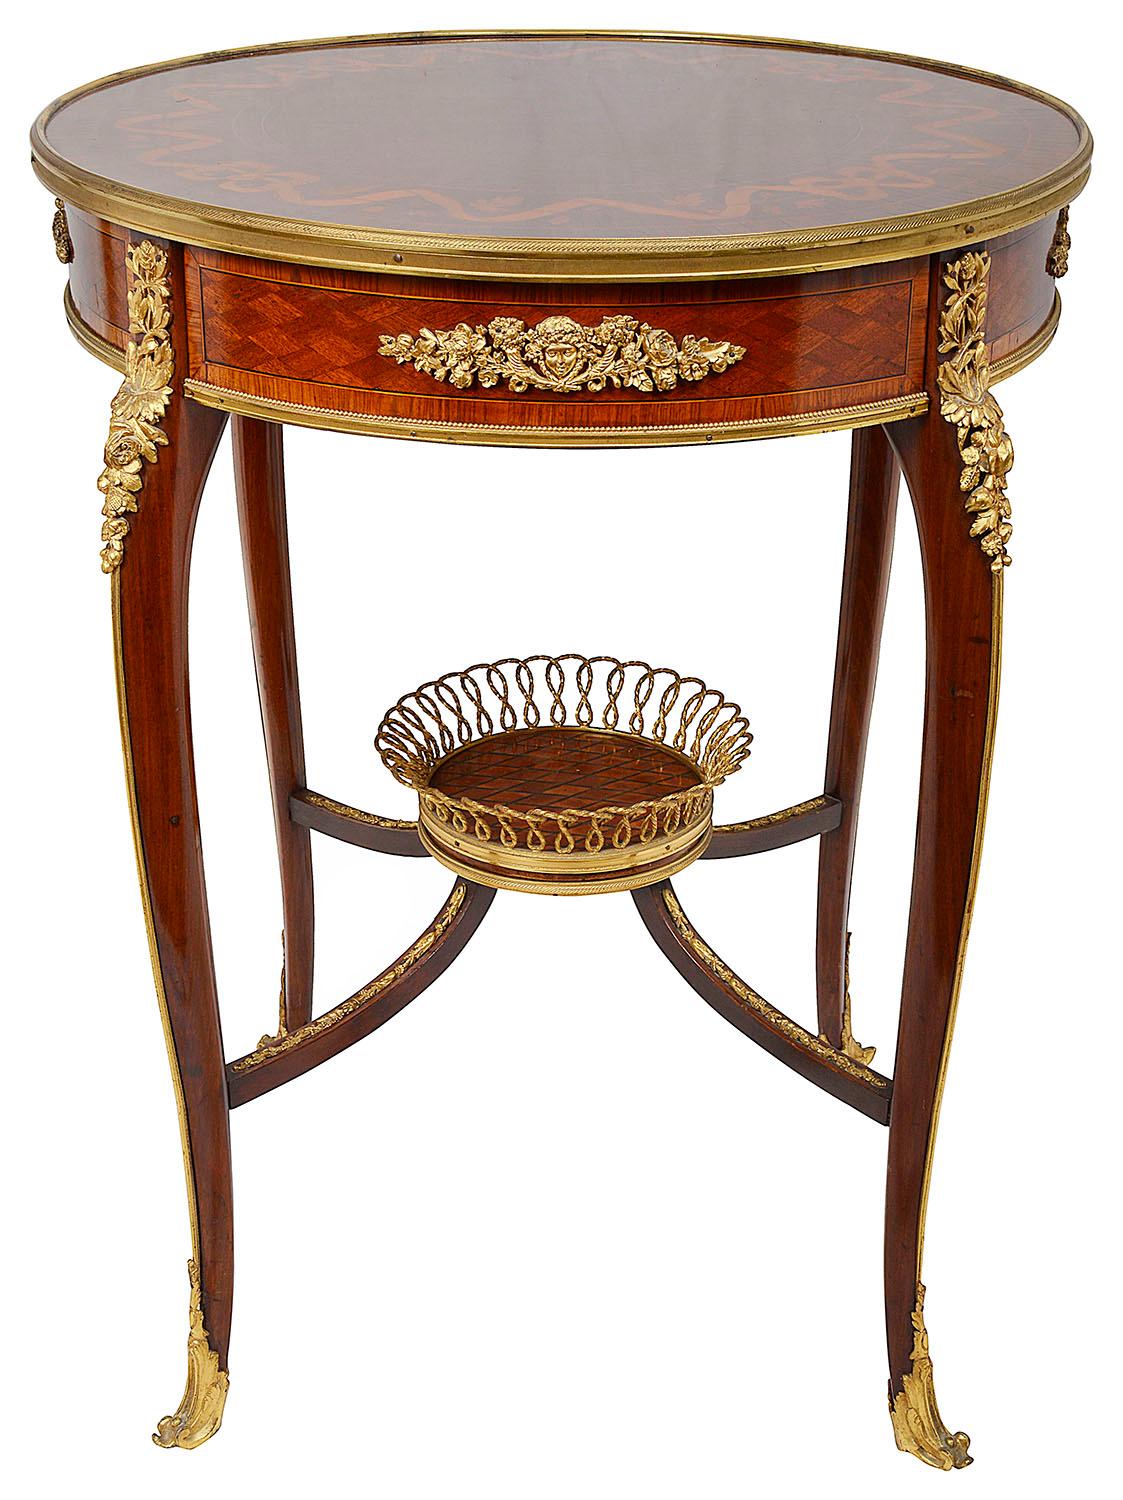 A very good quality French gueridon, having wonderful inlaid parquetry, ribbon and bow decoration to the top, gilded ormolu mounts to the frieze, legs and under-tier, raised on elegant cabriole legs.
In the style of Francoise Linke.